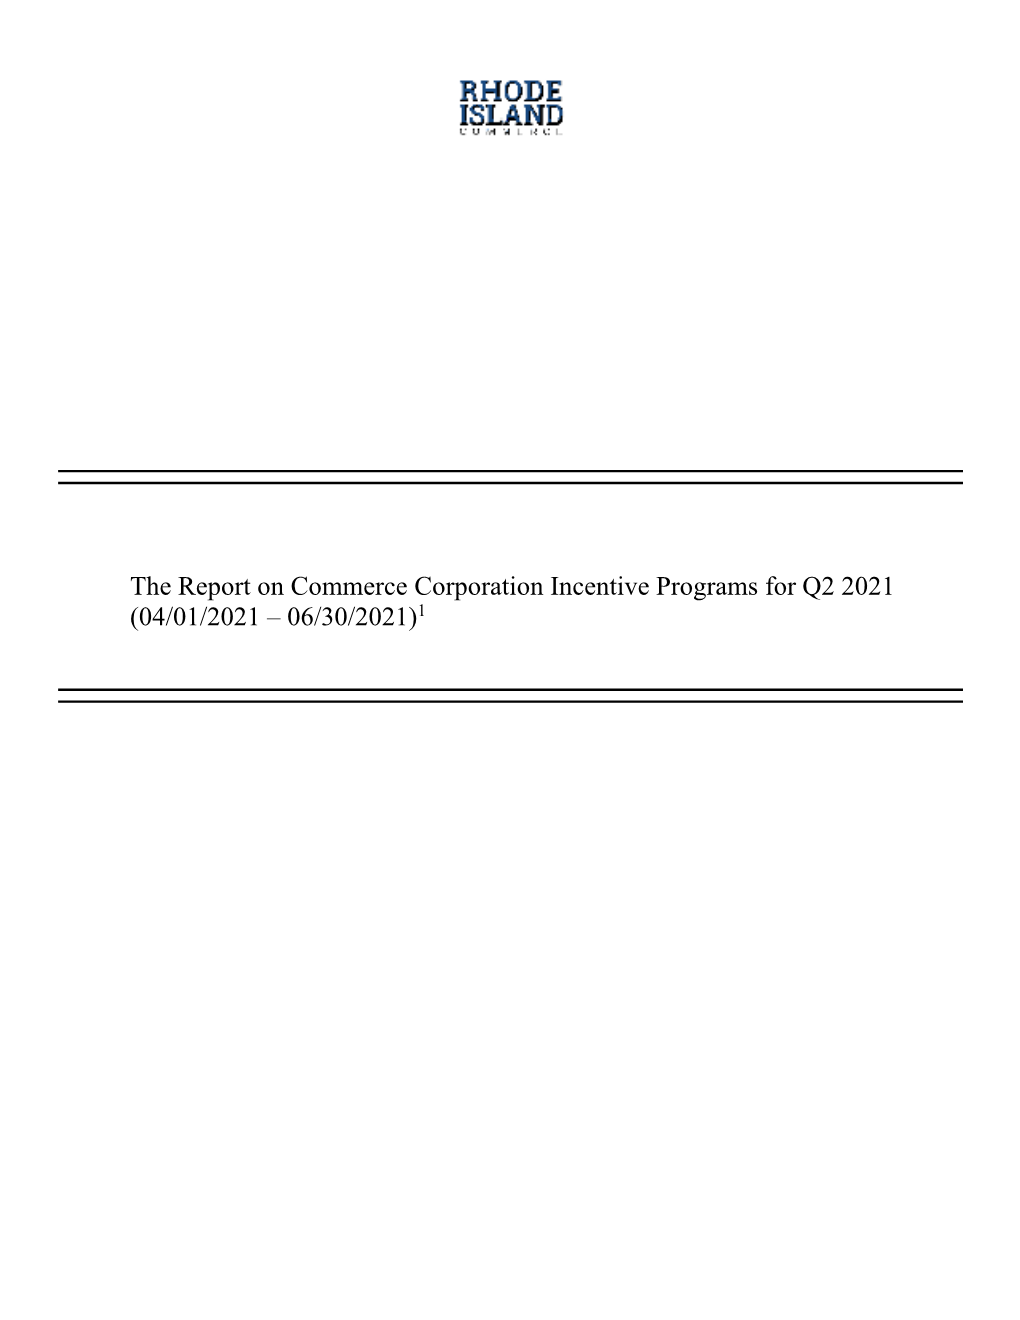 The Report on Commerce Corporation Incentive Programs for Q2 2021 (04/01/2021 – 06/30/2021)1